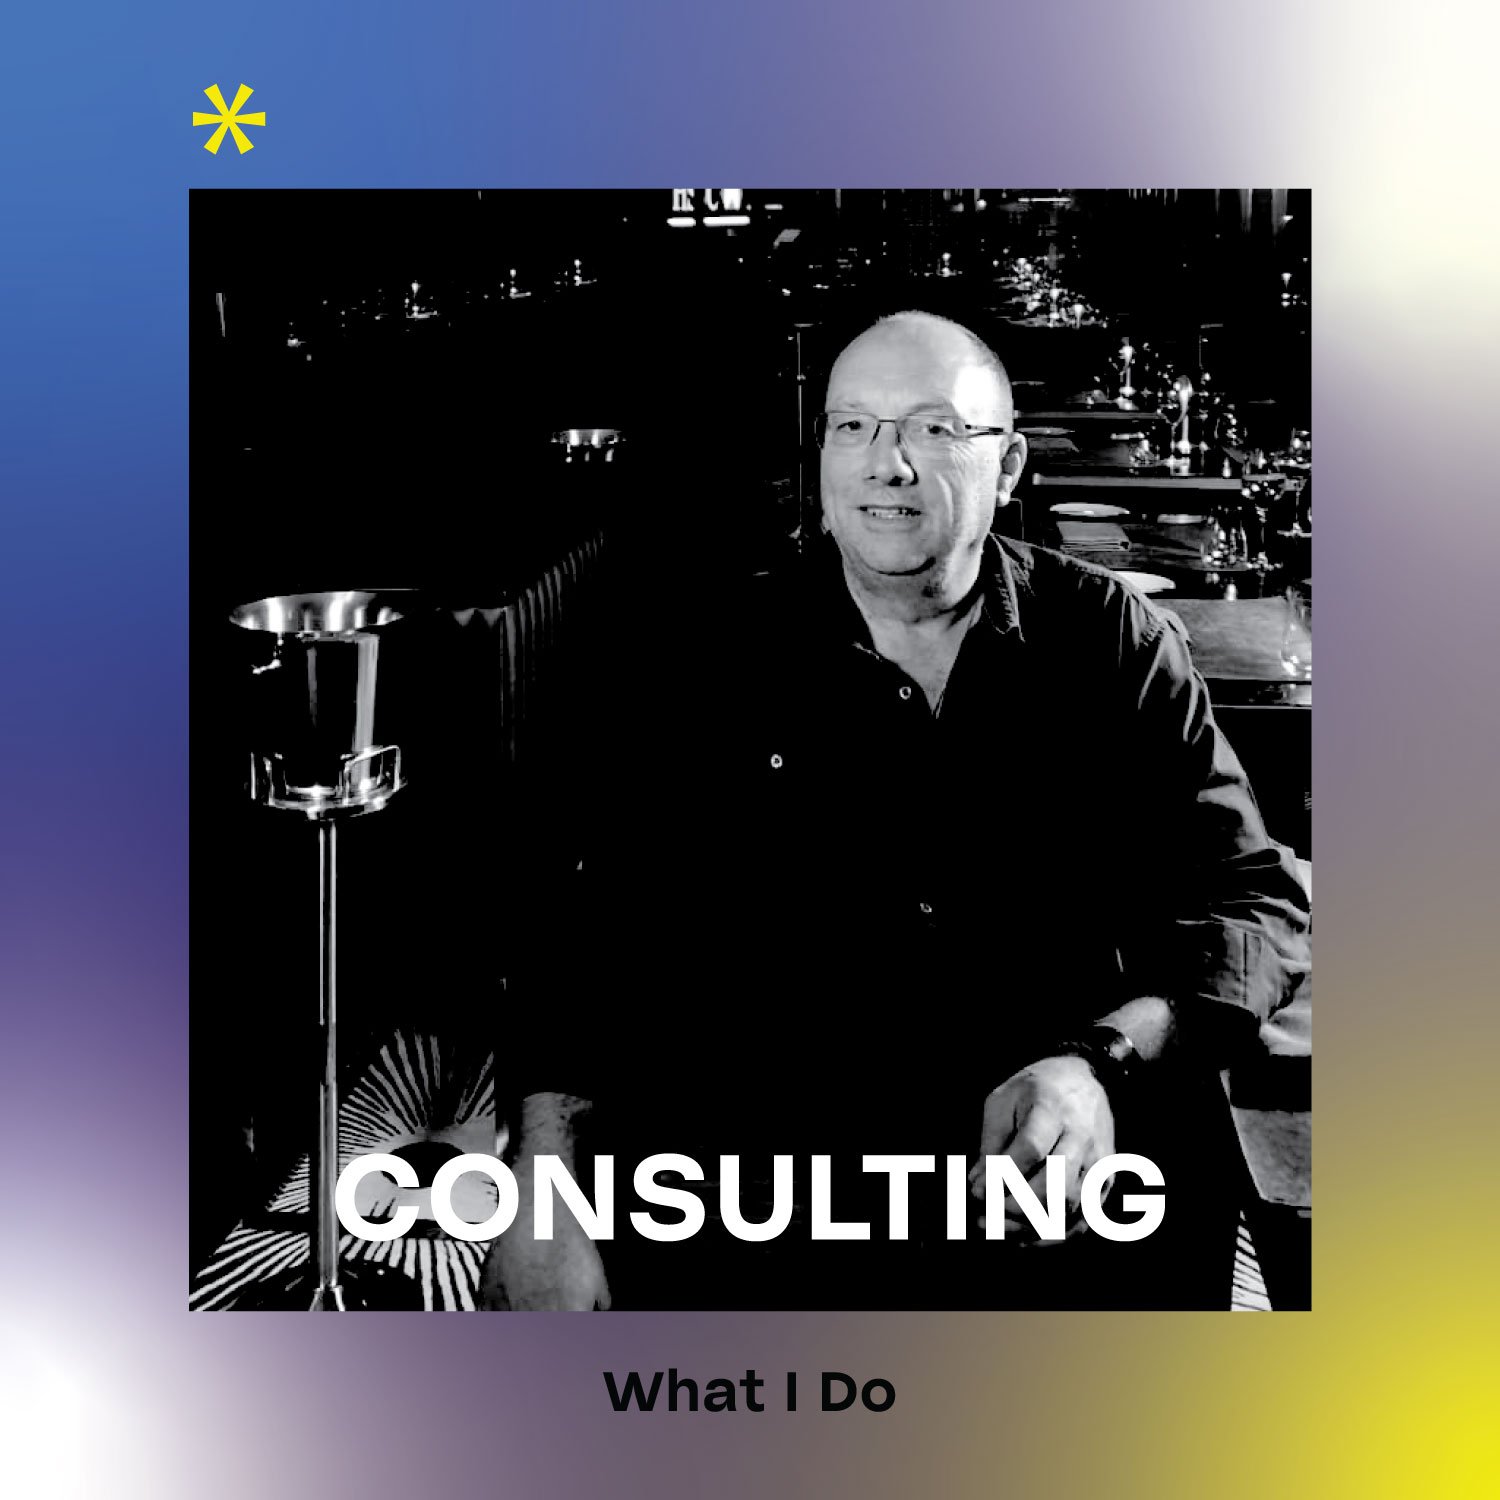 Renowned lighting designer Martin Klaasen at one of his award winning projects, introducing his consulting services on the Light Talk website.